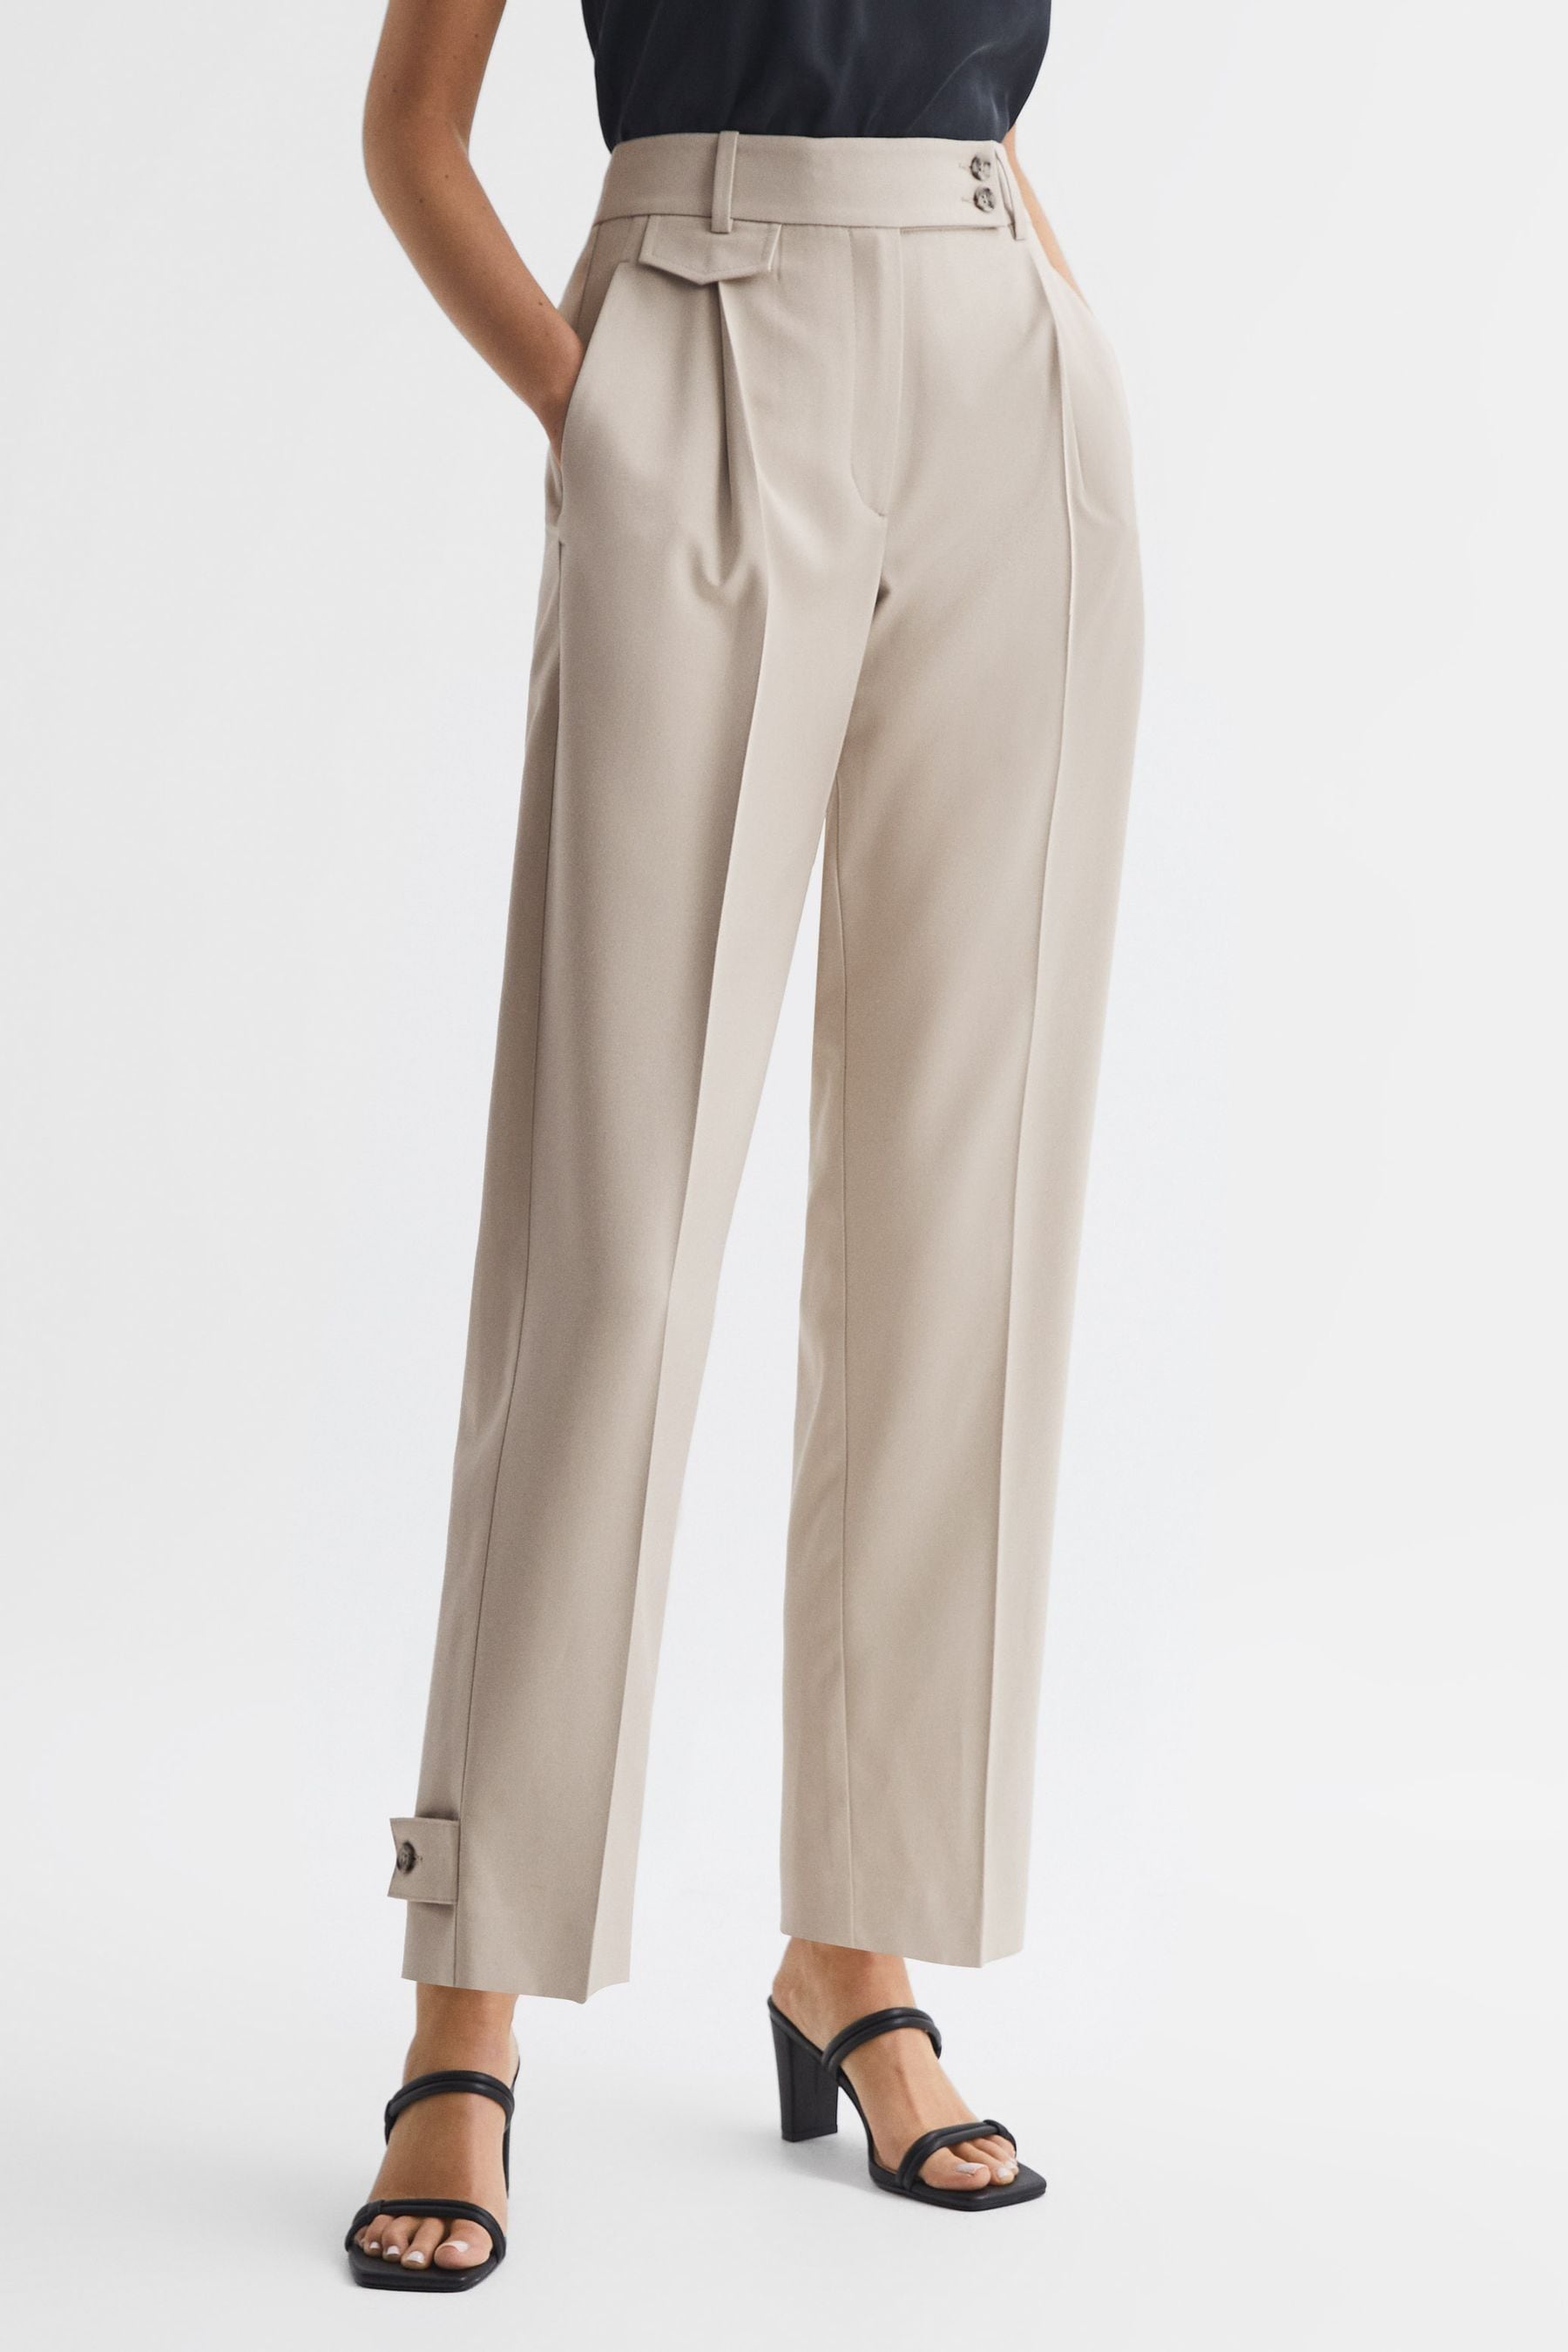 Reiss Womens Stone River Tapered High-rise Woven Trousers